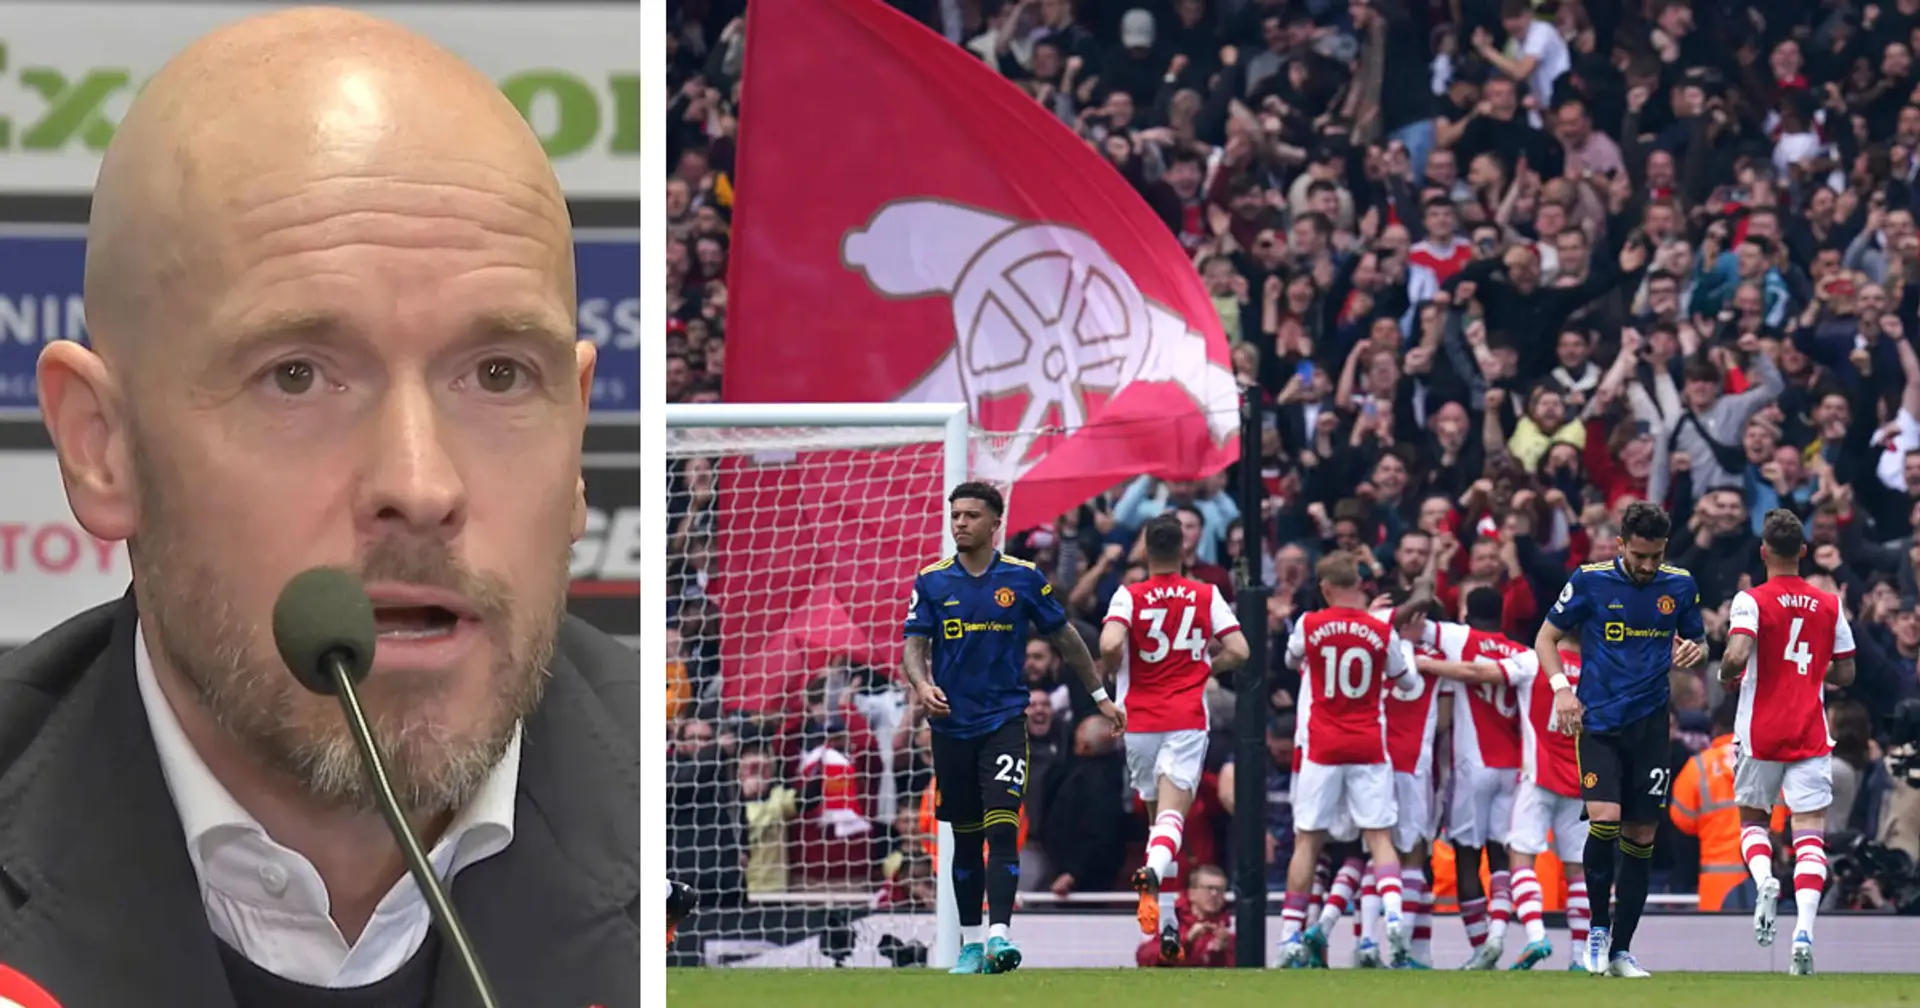 'I don't have an opinion on their results': Ten Hag refuses to speak on United's troubles after Arsenal loss